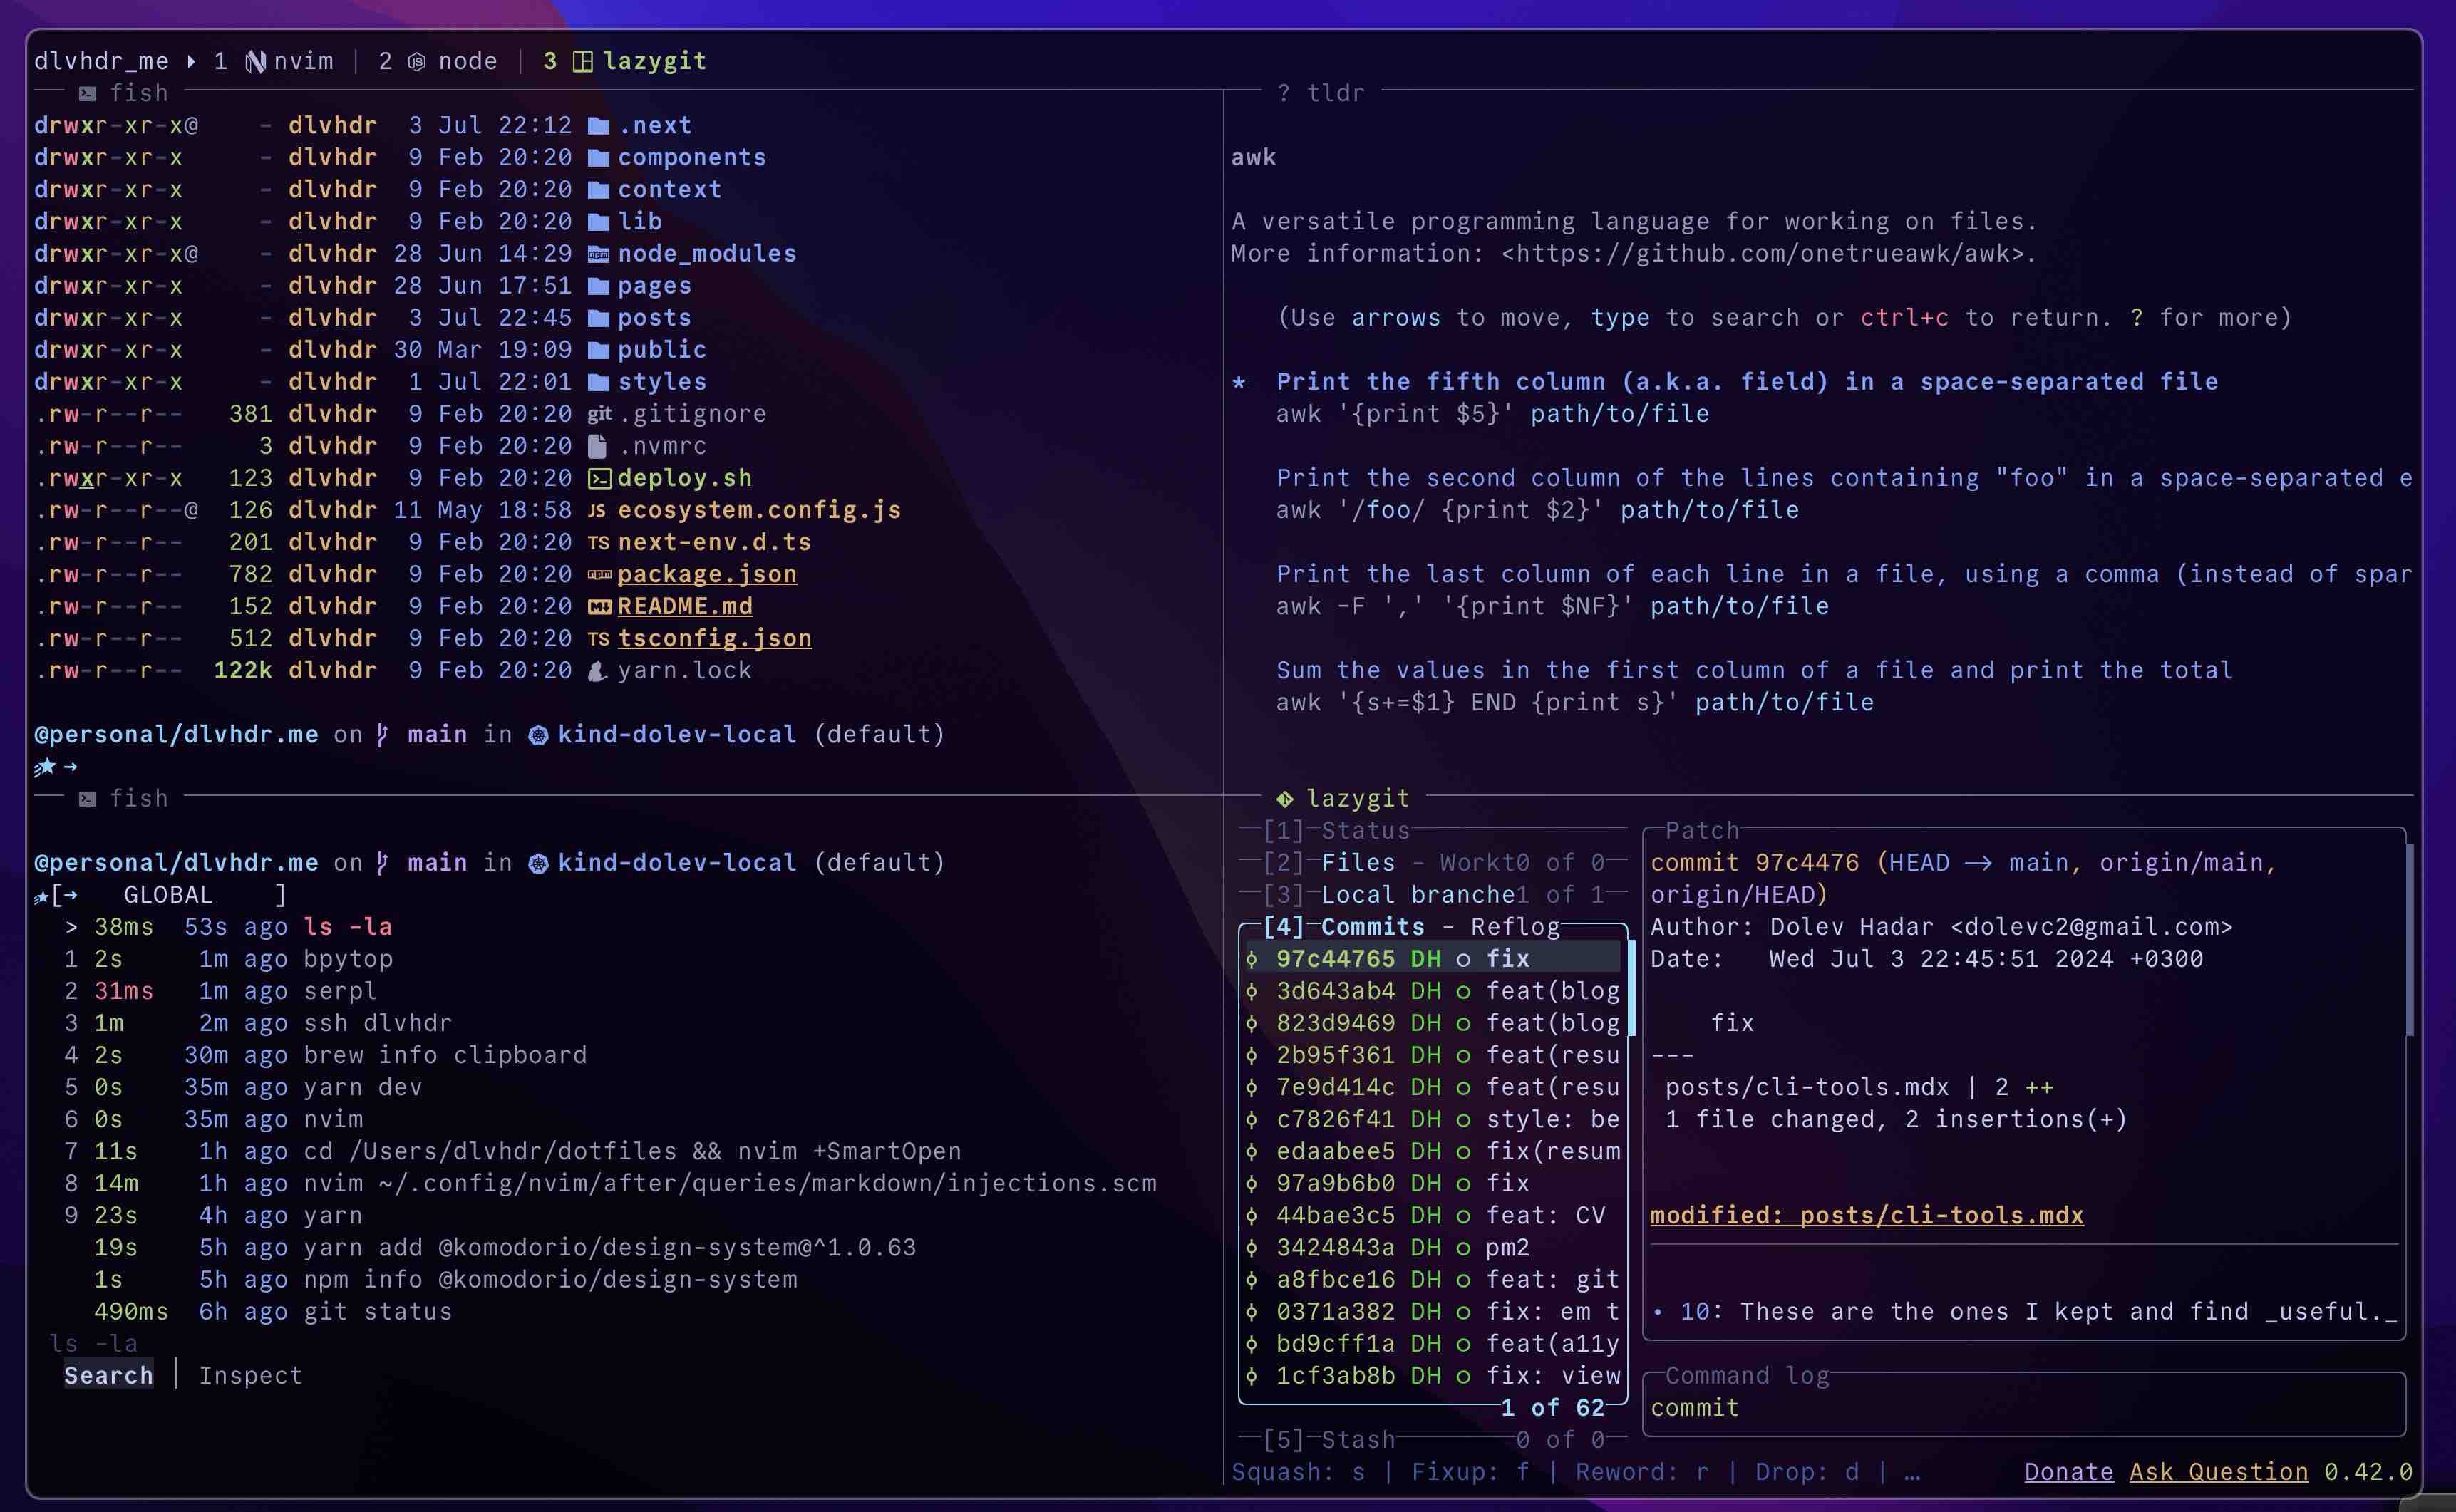 A screenshot of my terminal displaying tmux with 4 panes - each pane running a different tool